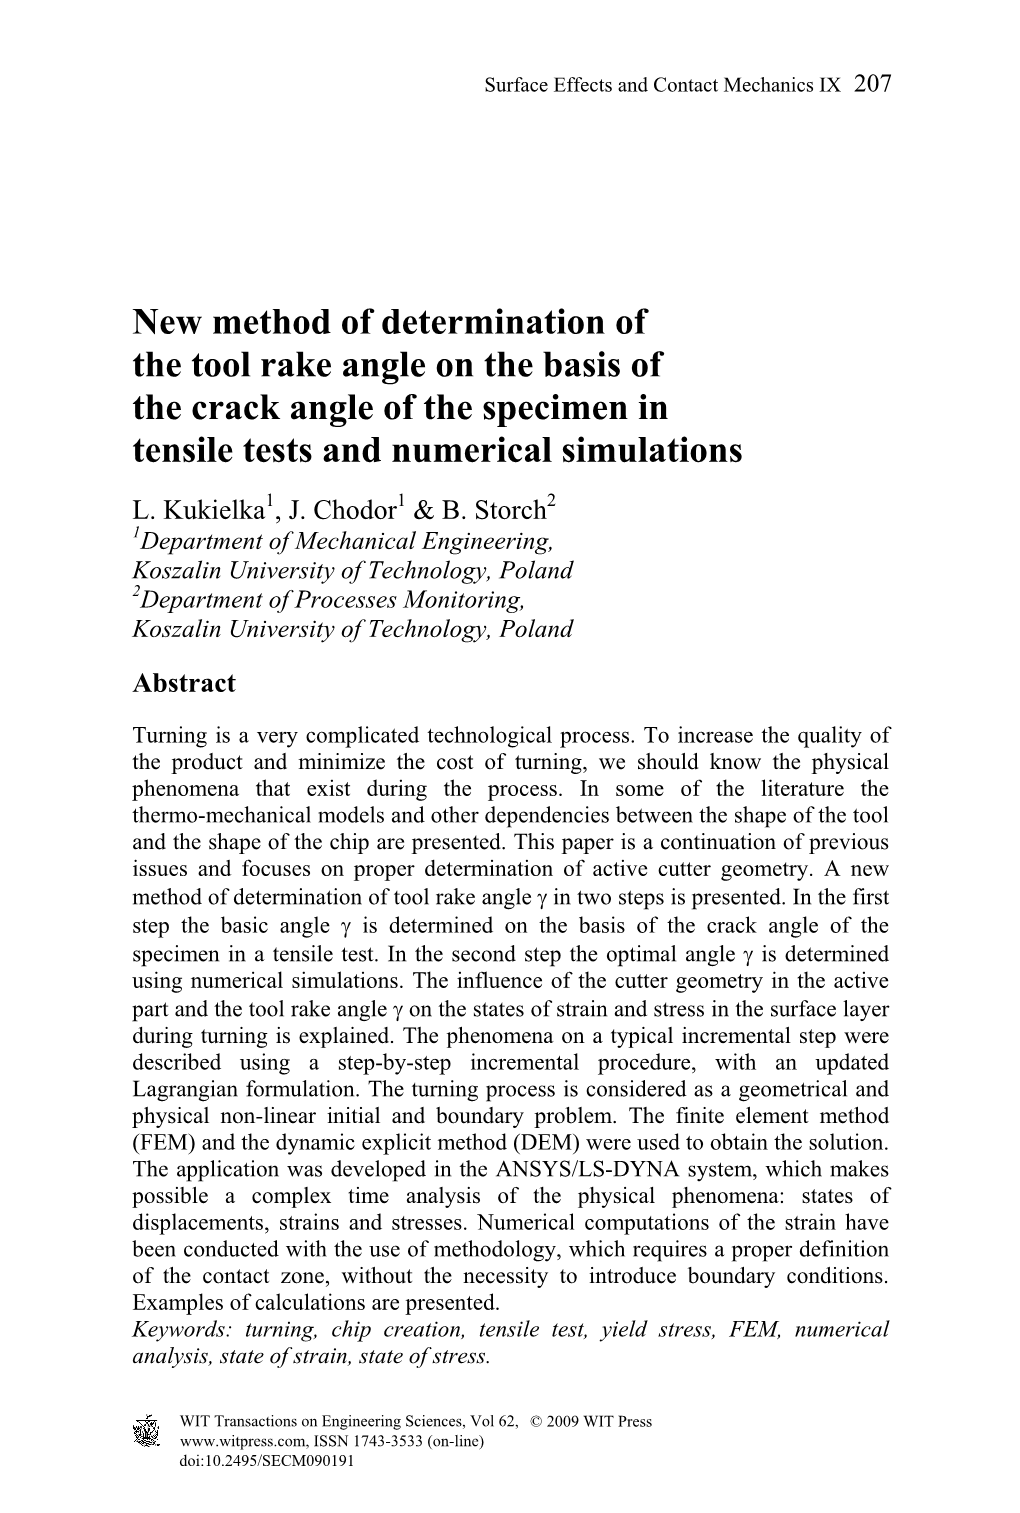 New Method of Determination of the Tool Rake Angle on the Basis of the Crack Angle of the Specimen in Tensile Tests and Numerical Simulations L